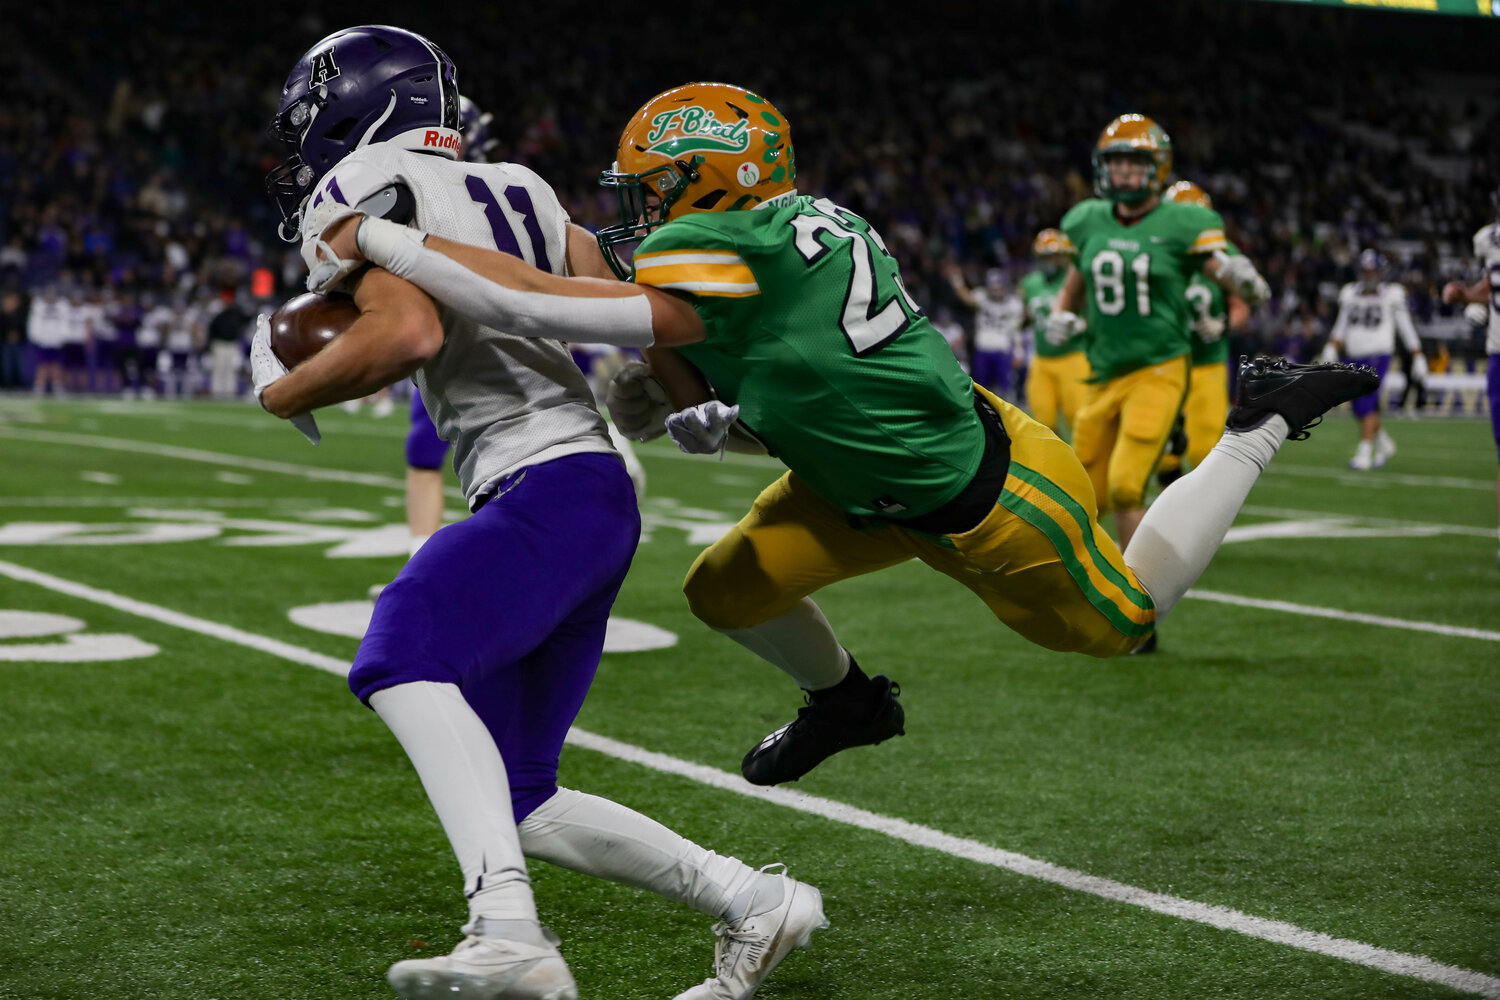 Tumwater's Peyton Davis dives for a tackle during a 60-30 loss to Anacortes Dec. 2. at Husky Stadium.